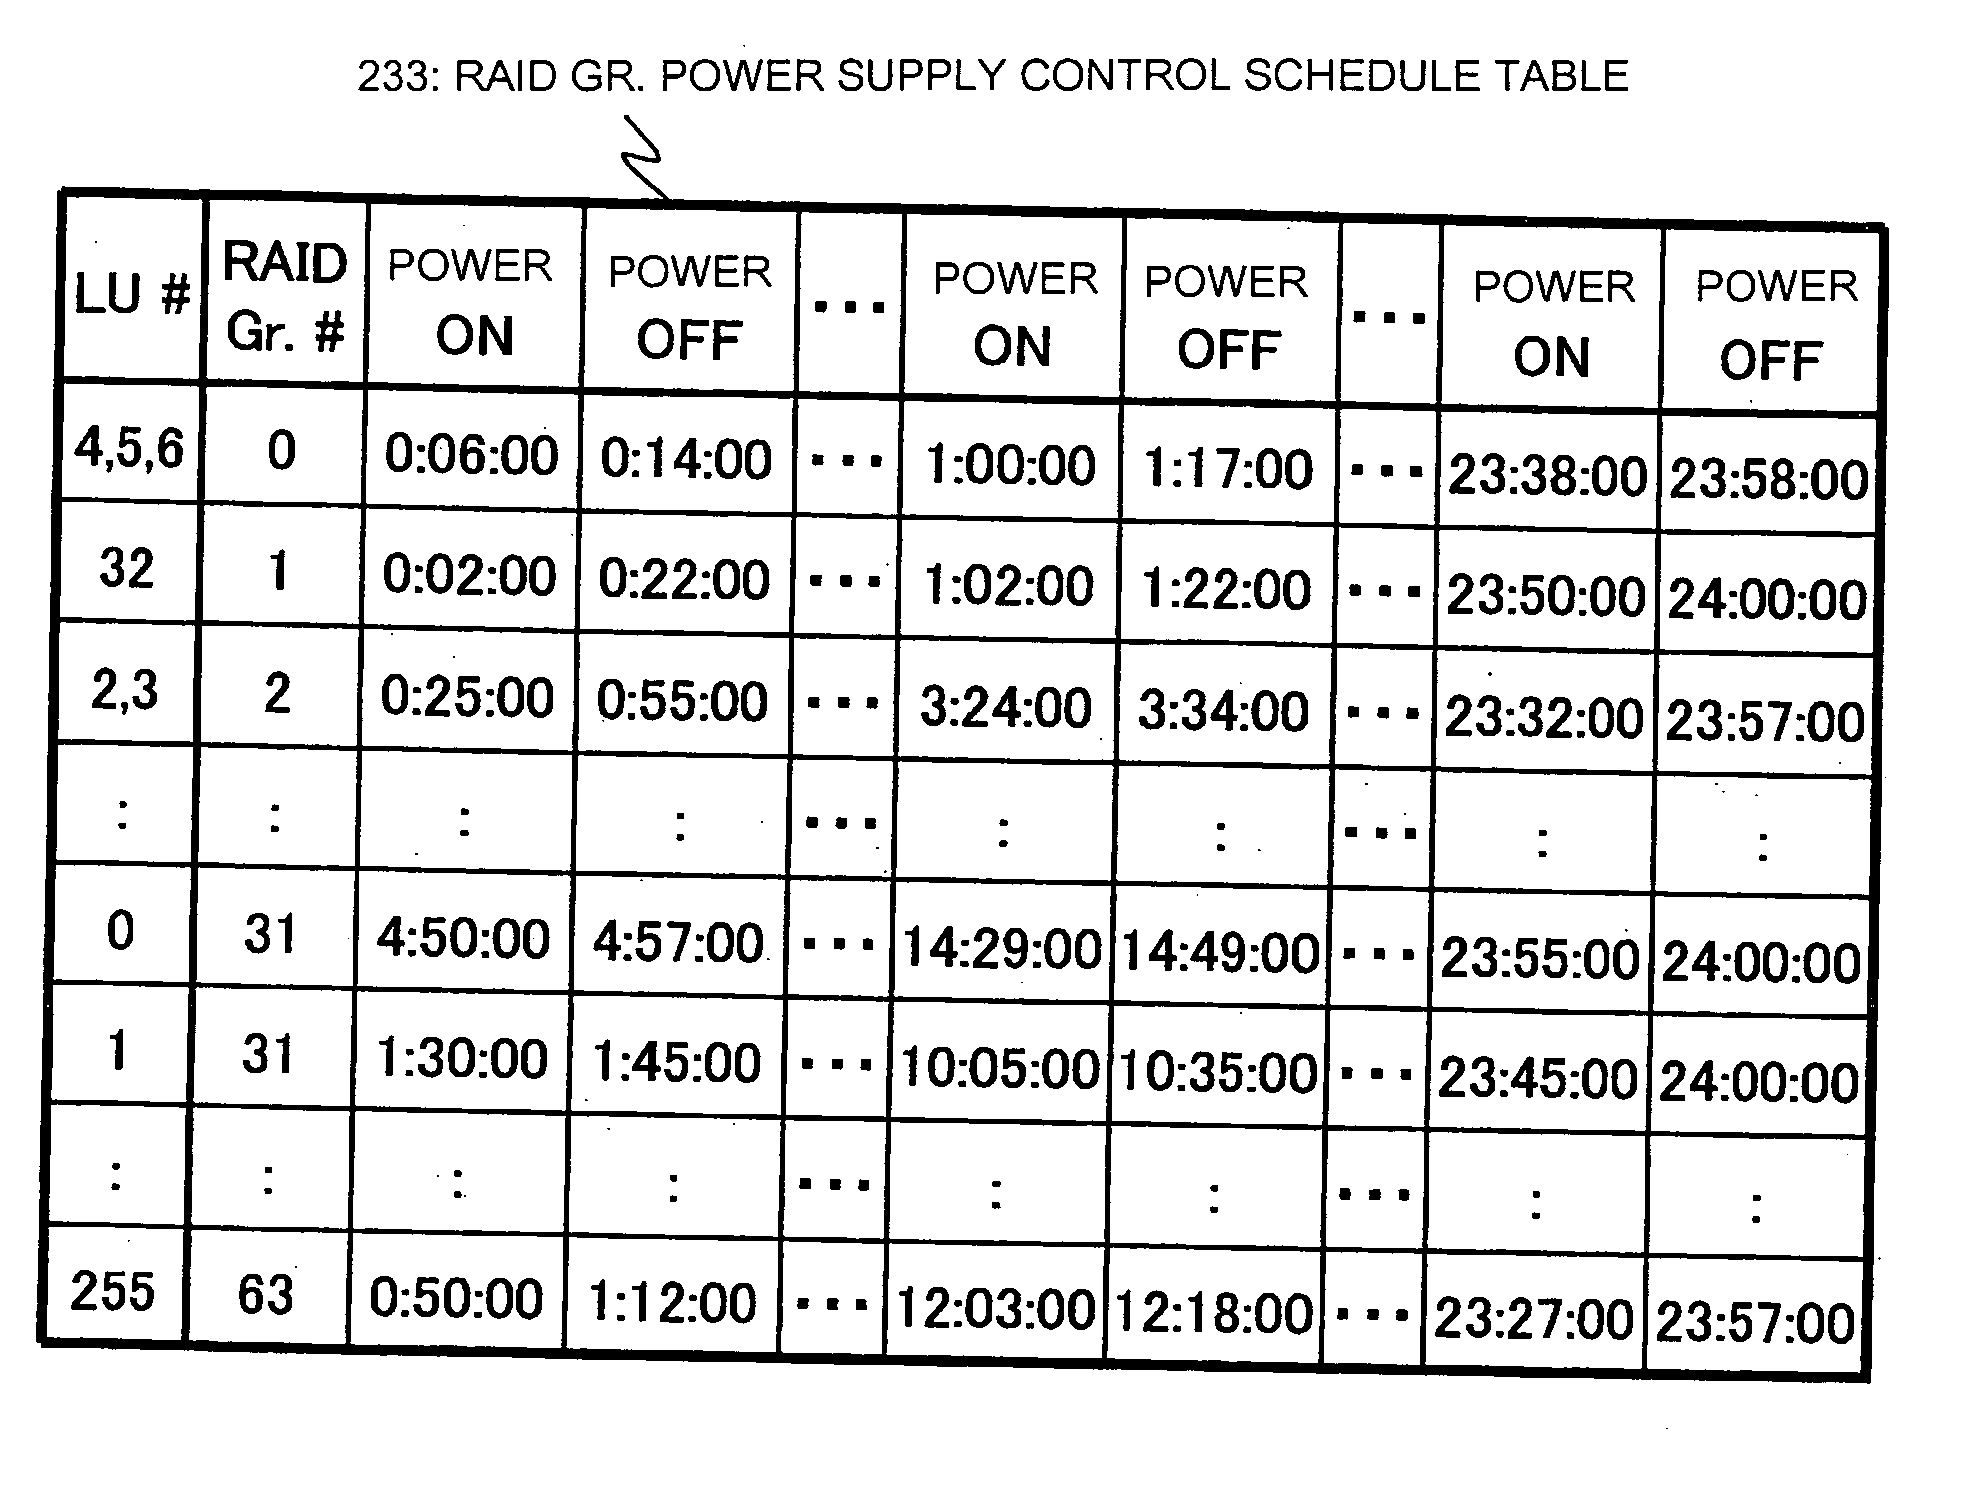 Computer apparatus, storage apparatus, system management apparatus, and hard disk unit power supply controlling method